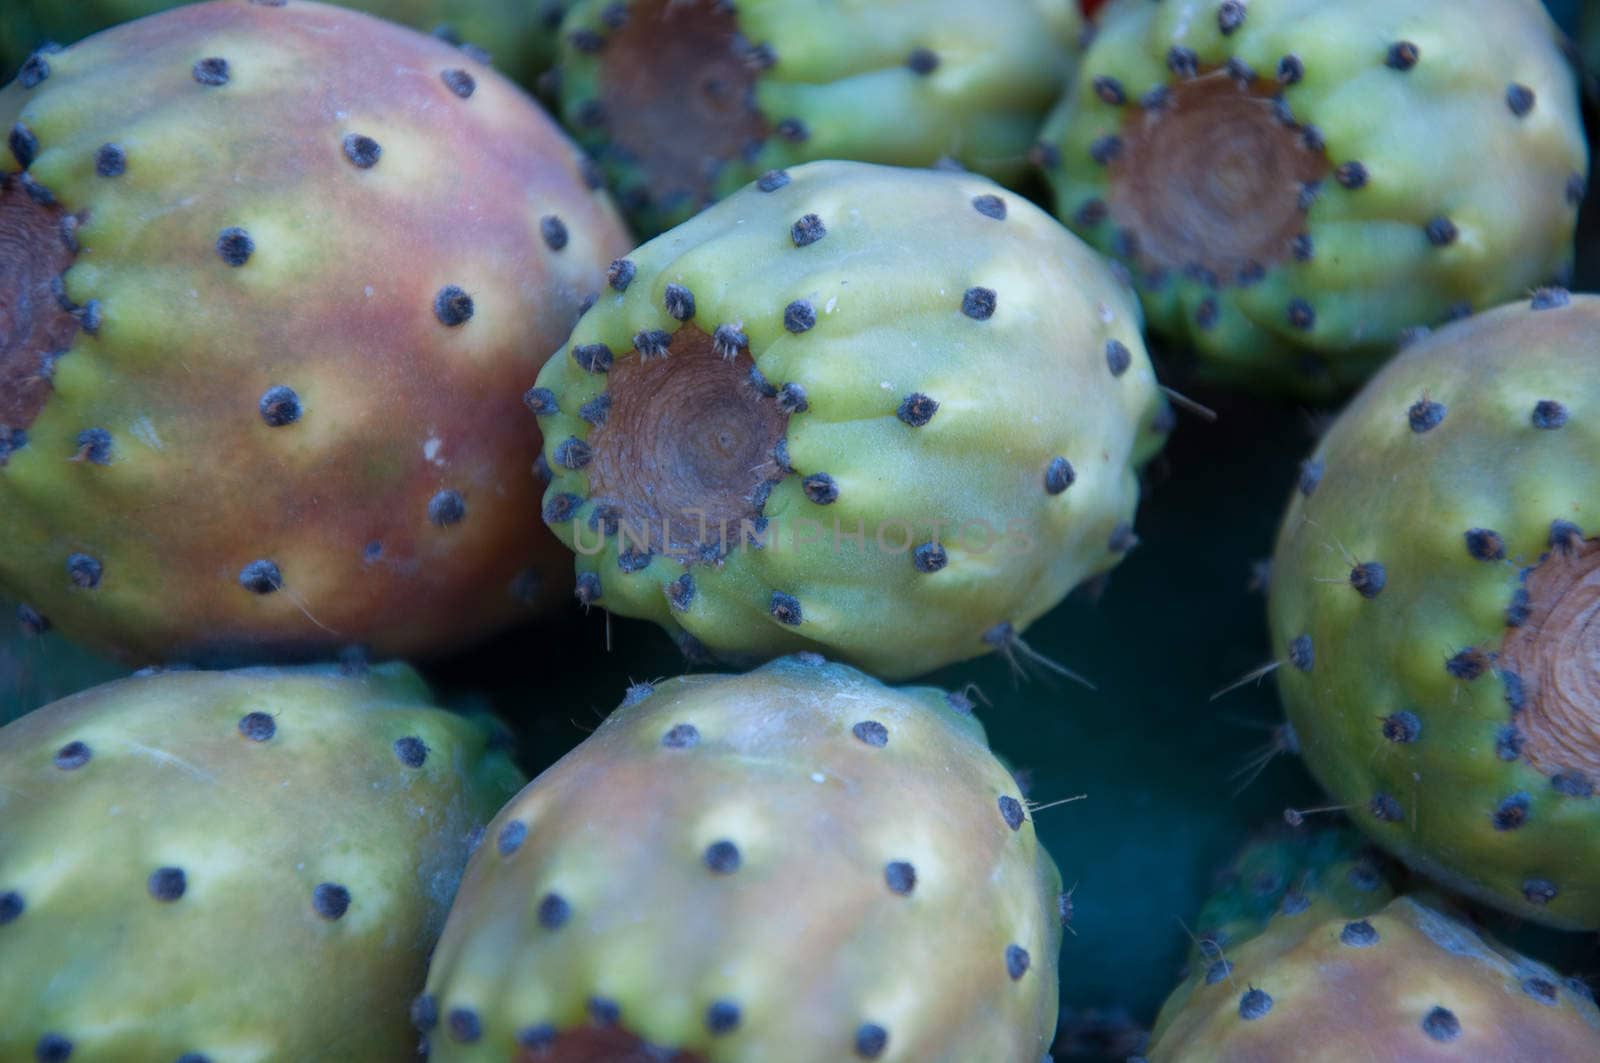 Several fruits of prickly pear from italy